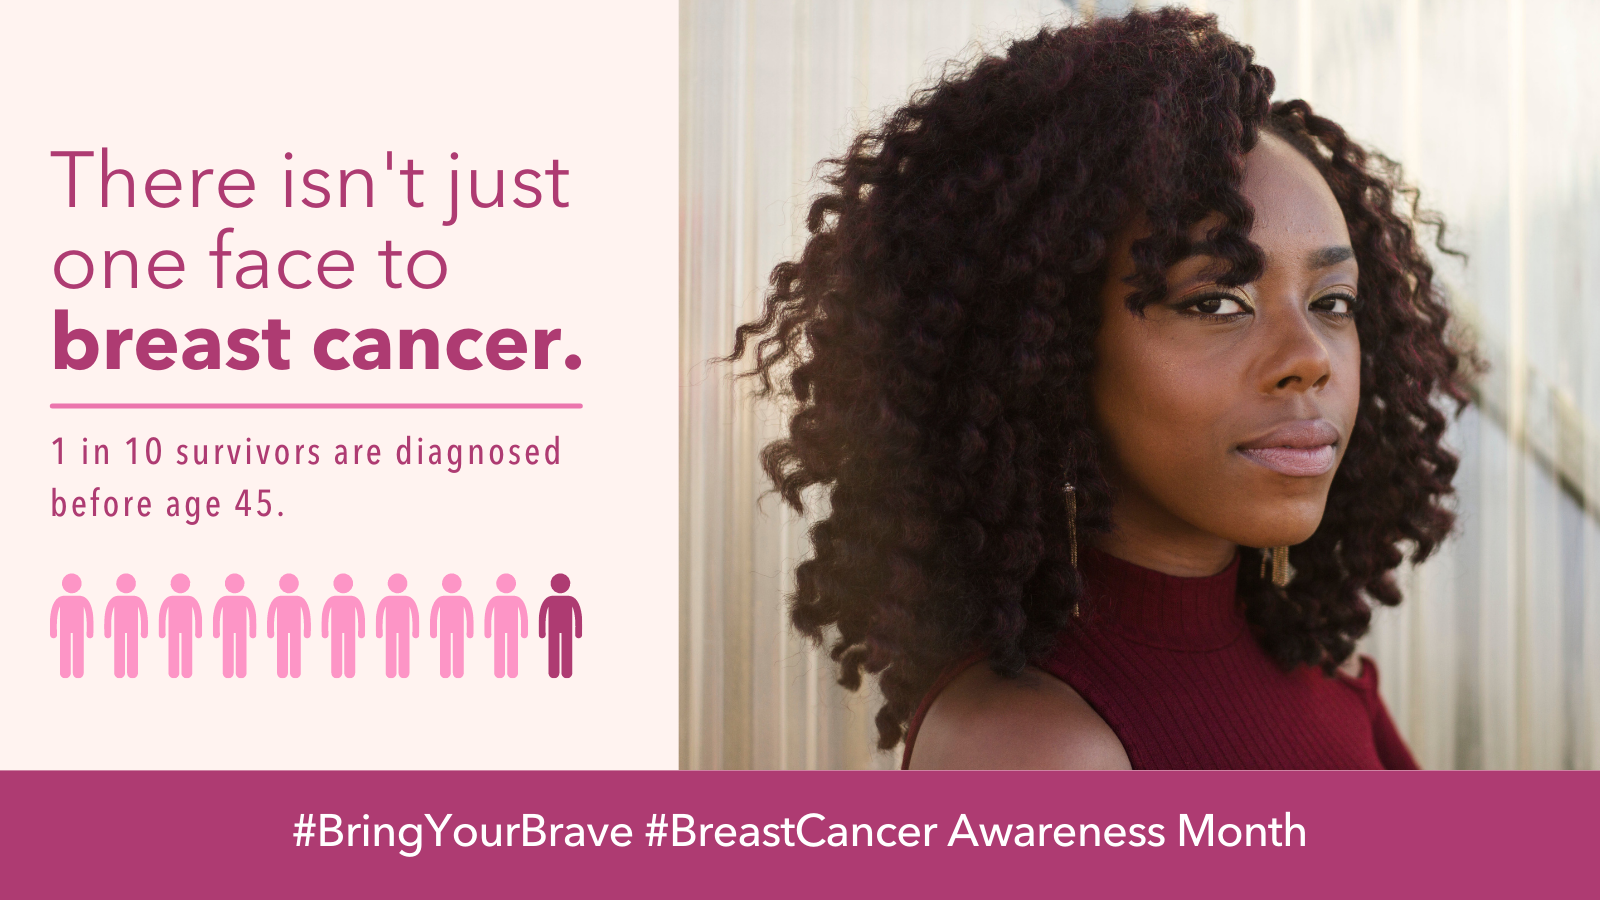 There isn't just one face to breast cancer